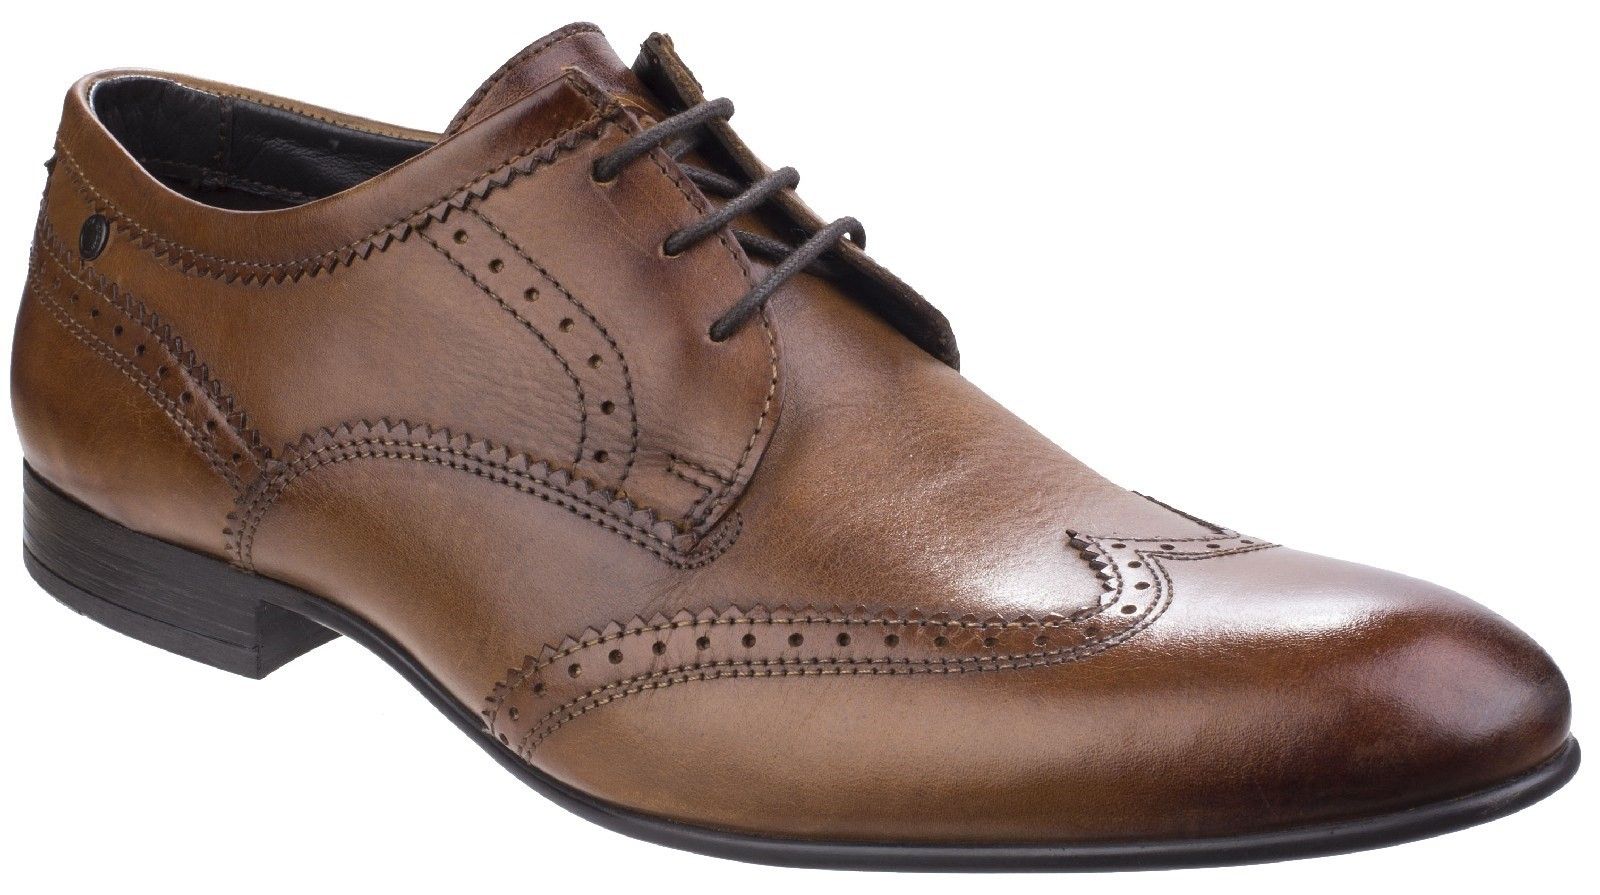 This Base London Men's Purcell shoe, is a true performance piece from the Symphony range. The uppers boast some simple yet eye catching brogue detailing. The heel is proud and has a confident stance whilst providing an elegant silhouette. Finest quality leathers, individually washed for an authentic vintage look. 
High quality leather lining.